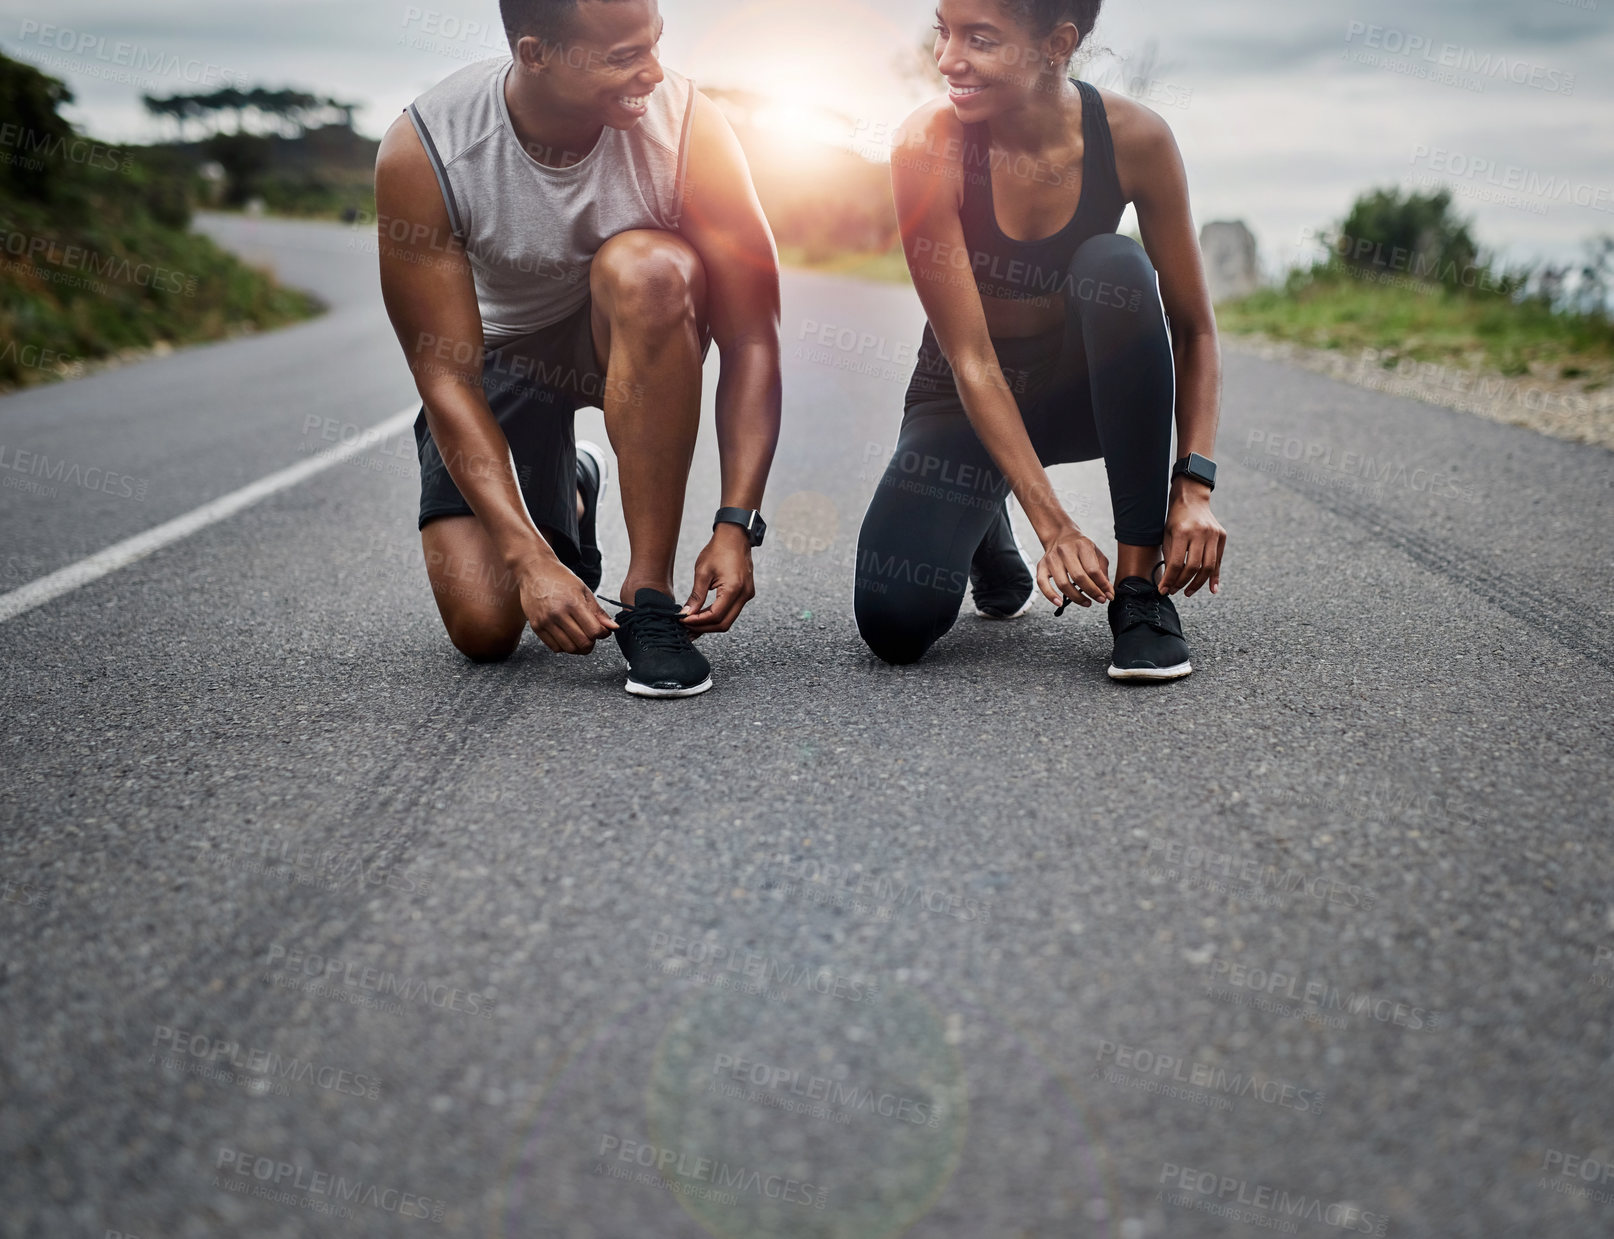 Buy stock photo Shot of a sporty young couple tying their shoelaces while exercising outdoors